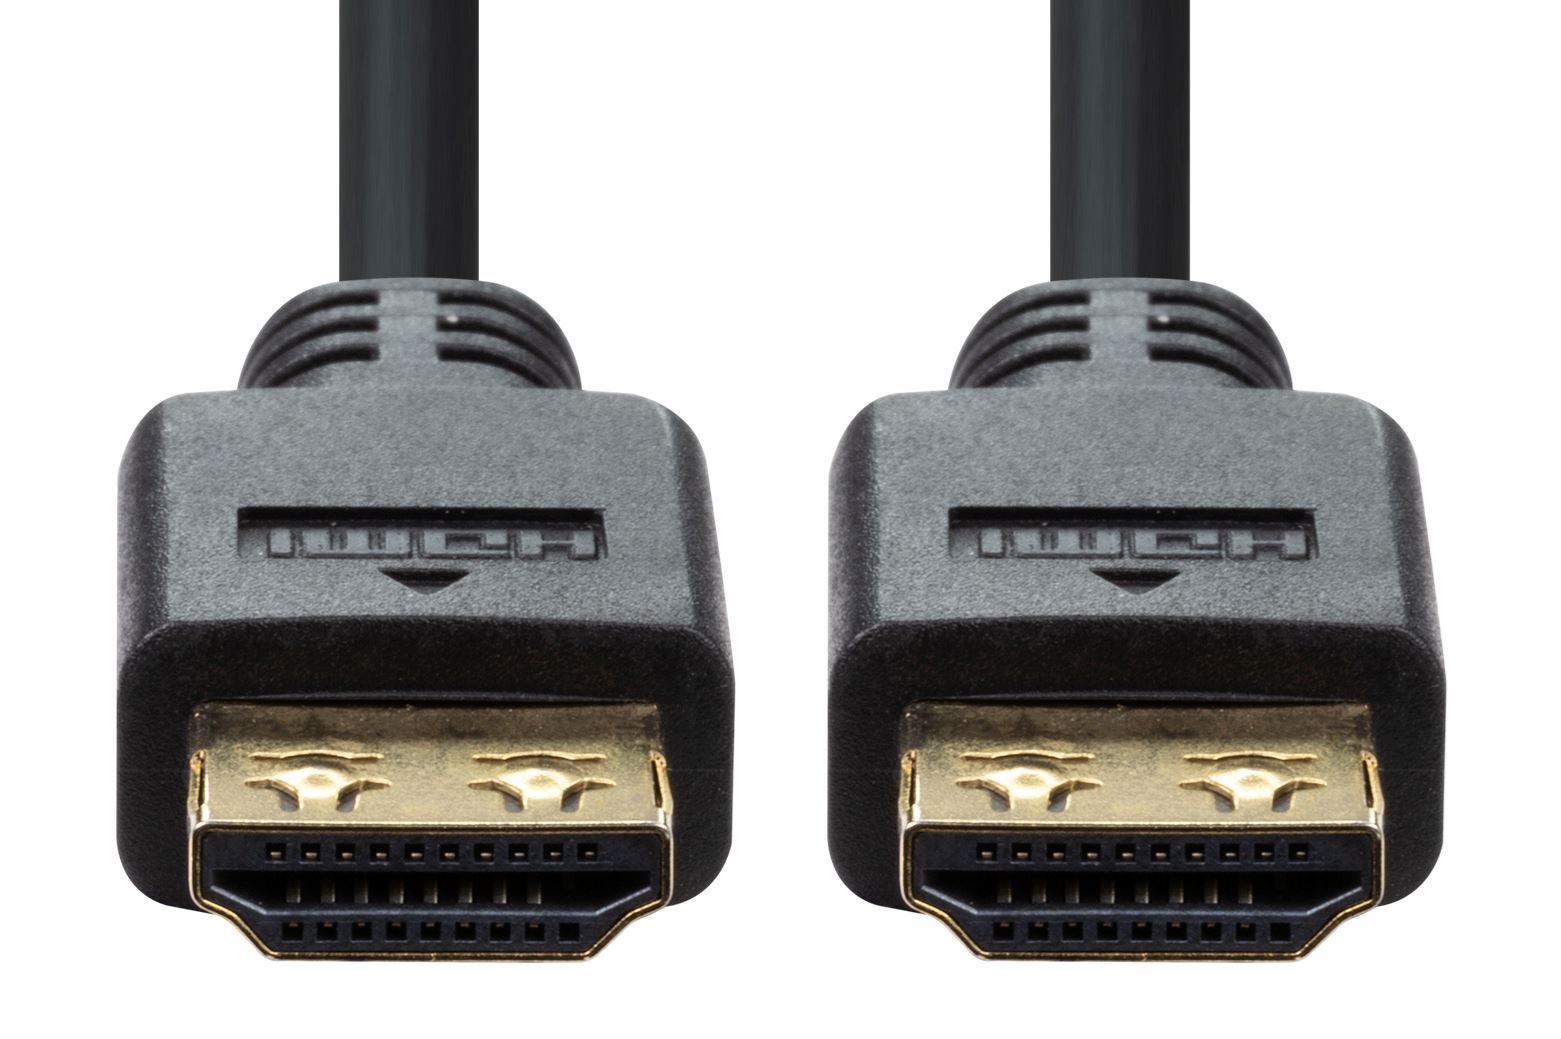 DYNAMIX_20M_HDMI_High_Speed_Flexi_Lock_Cable_with_Ethernet._Max_Res:_4K2K@30Hz._Supports_ARC_and_3D._Active_Directional_Cable_with_Redmere_Chipset_at_Display_end_of_cable. 733